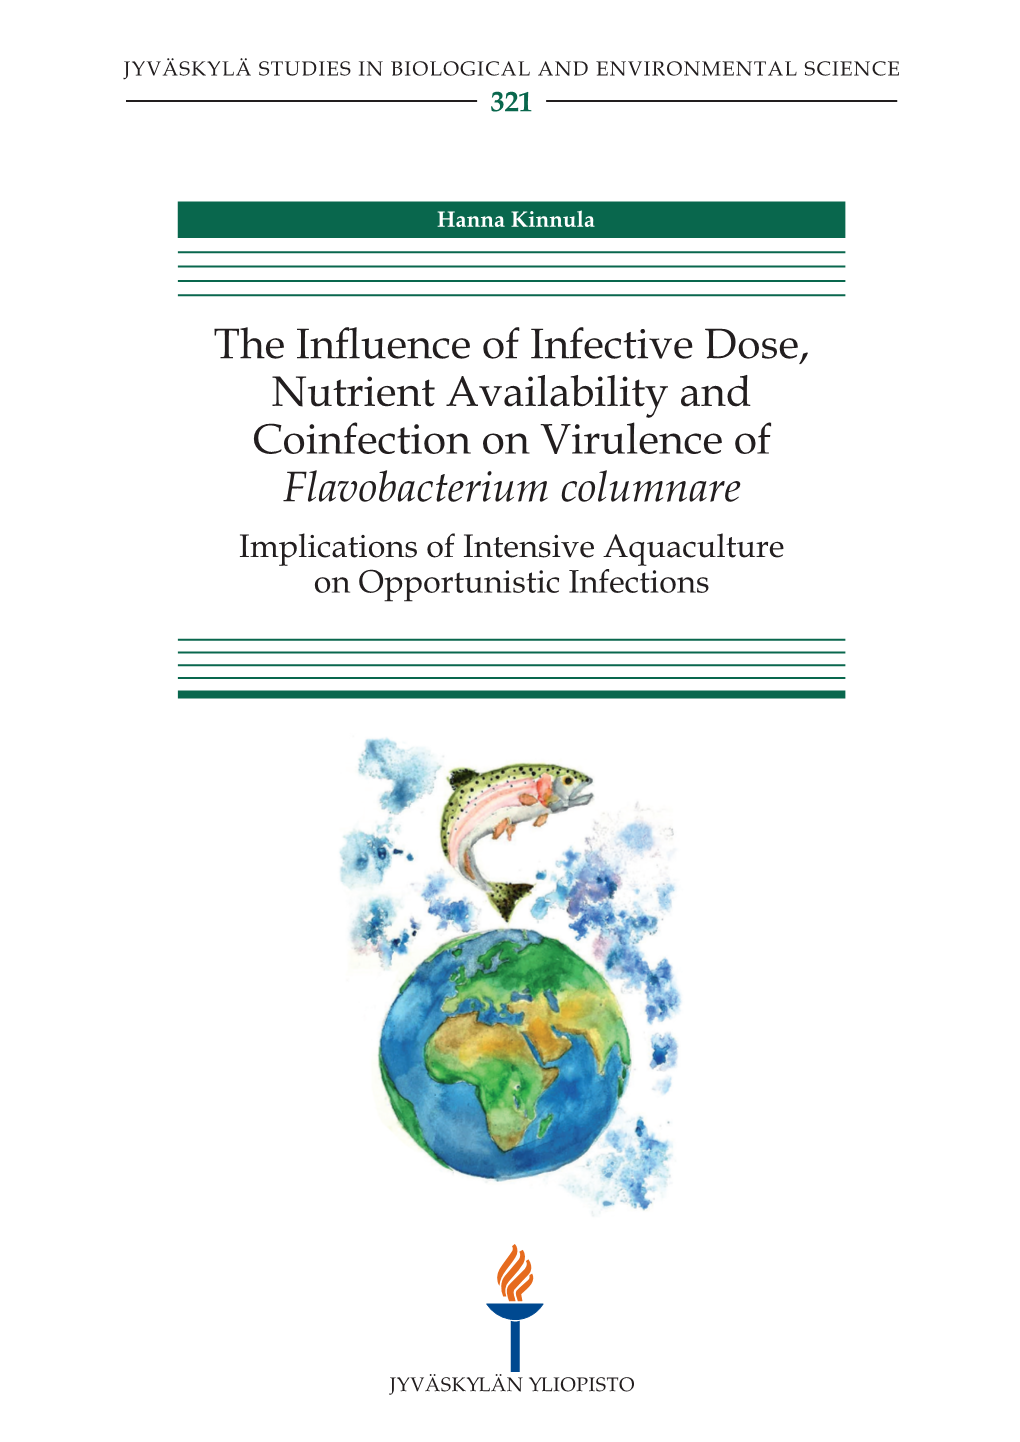 The Influence of Infective Dose, Nutrient Availability and Coinfection on Virulence of Flavobacterium Columnare